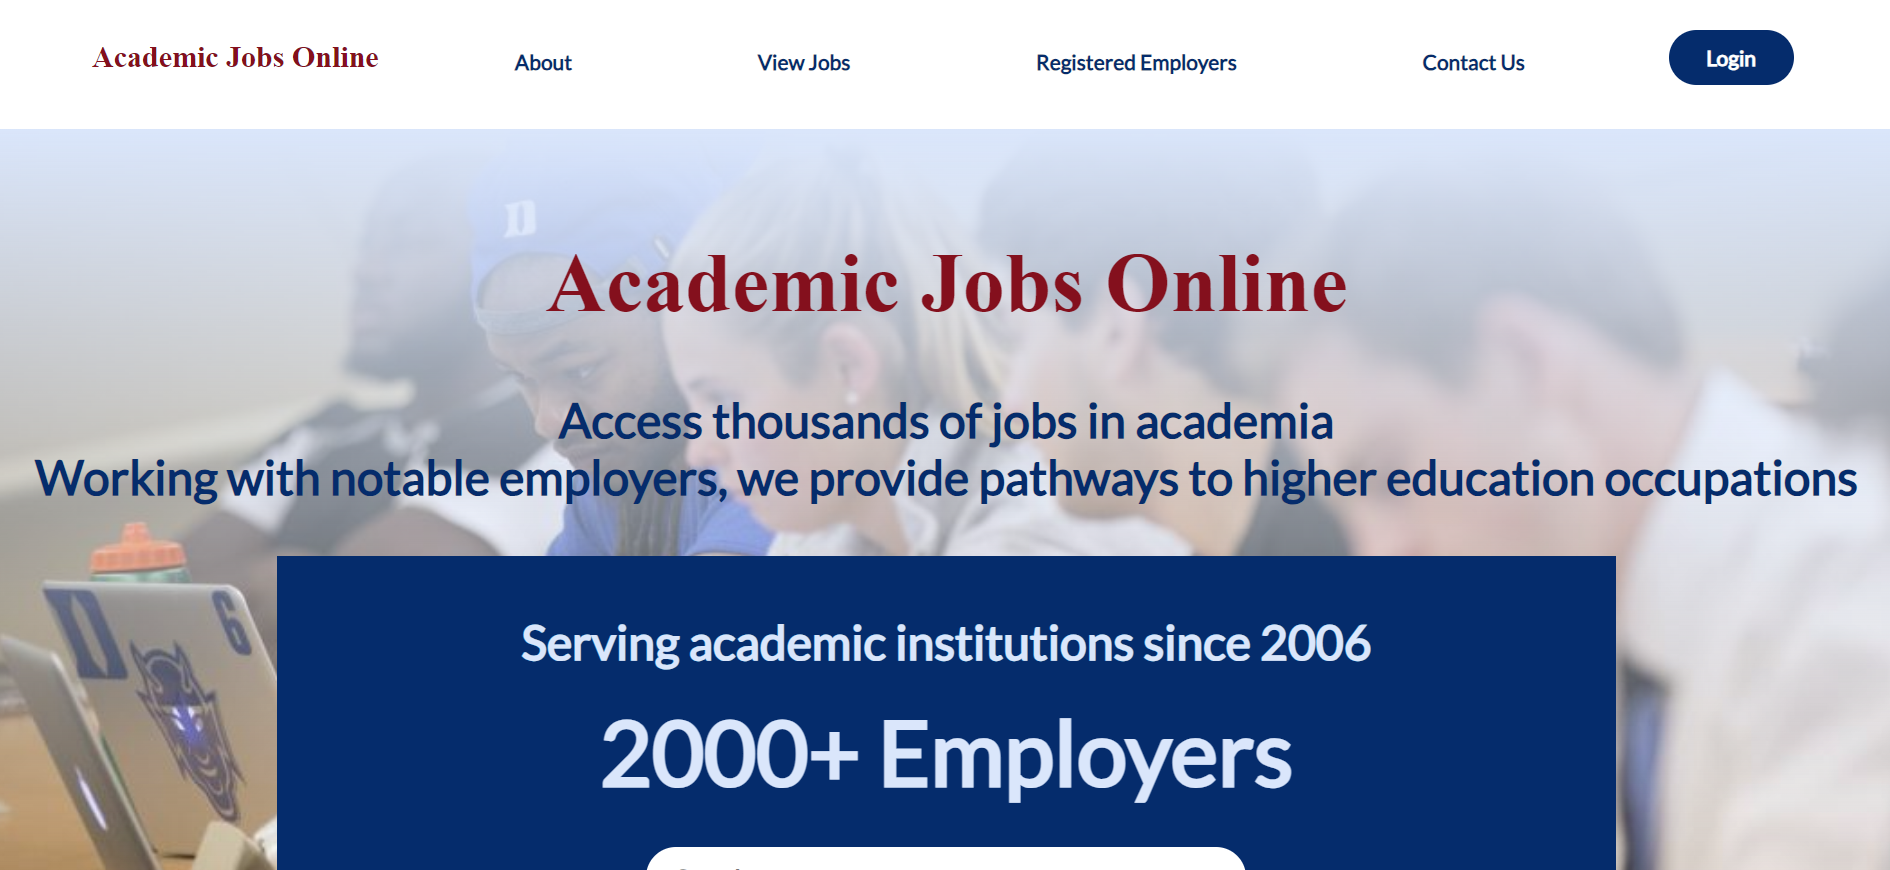 Academic Jobs Online Front Page